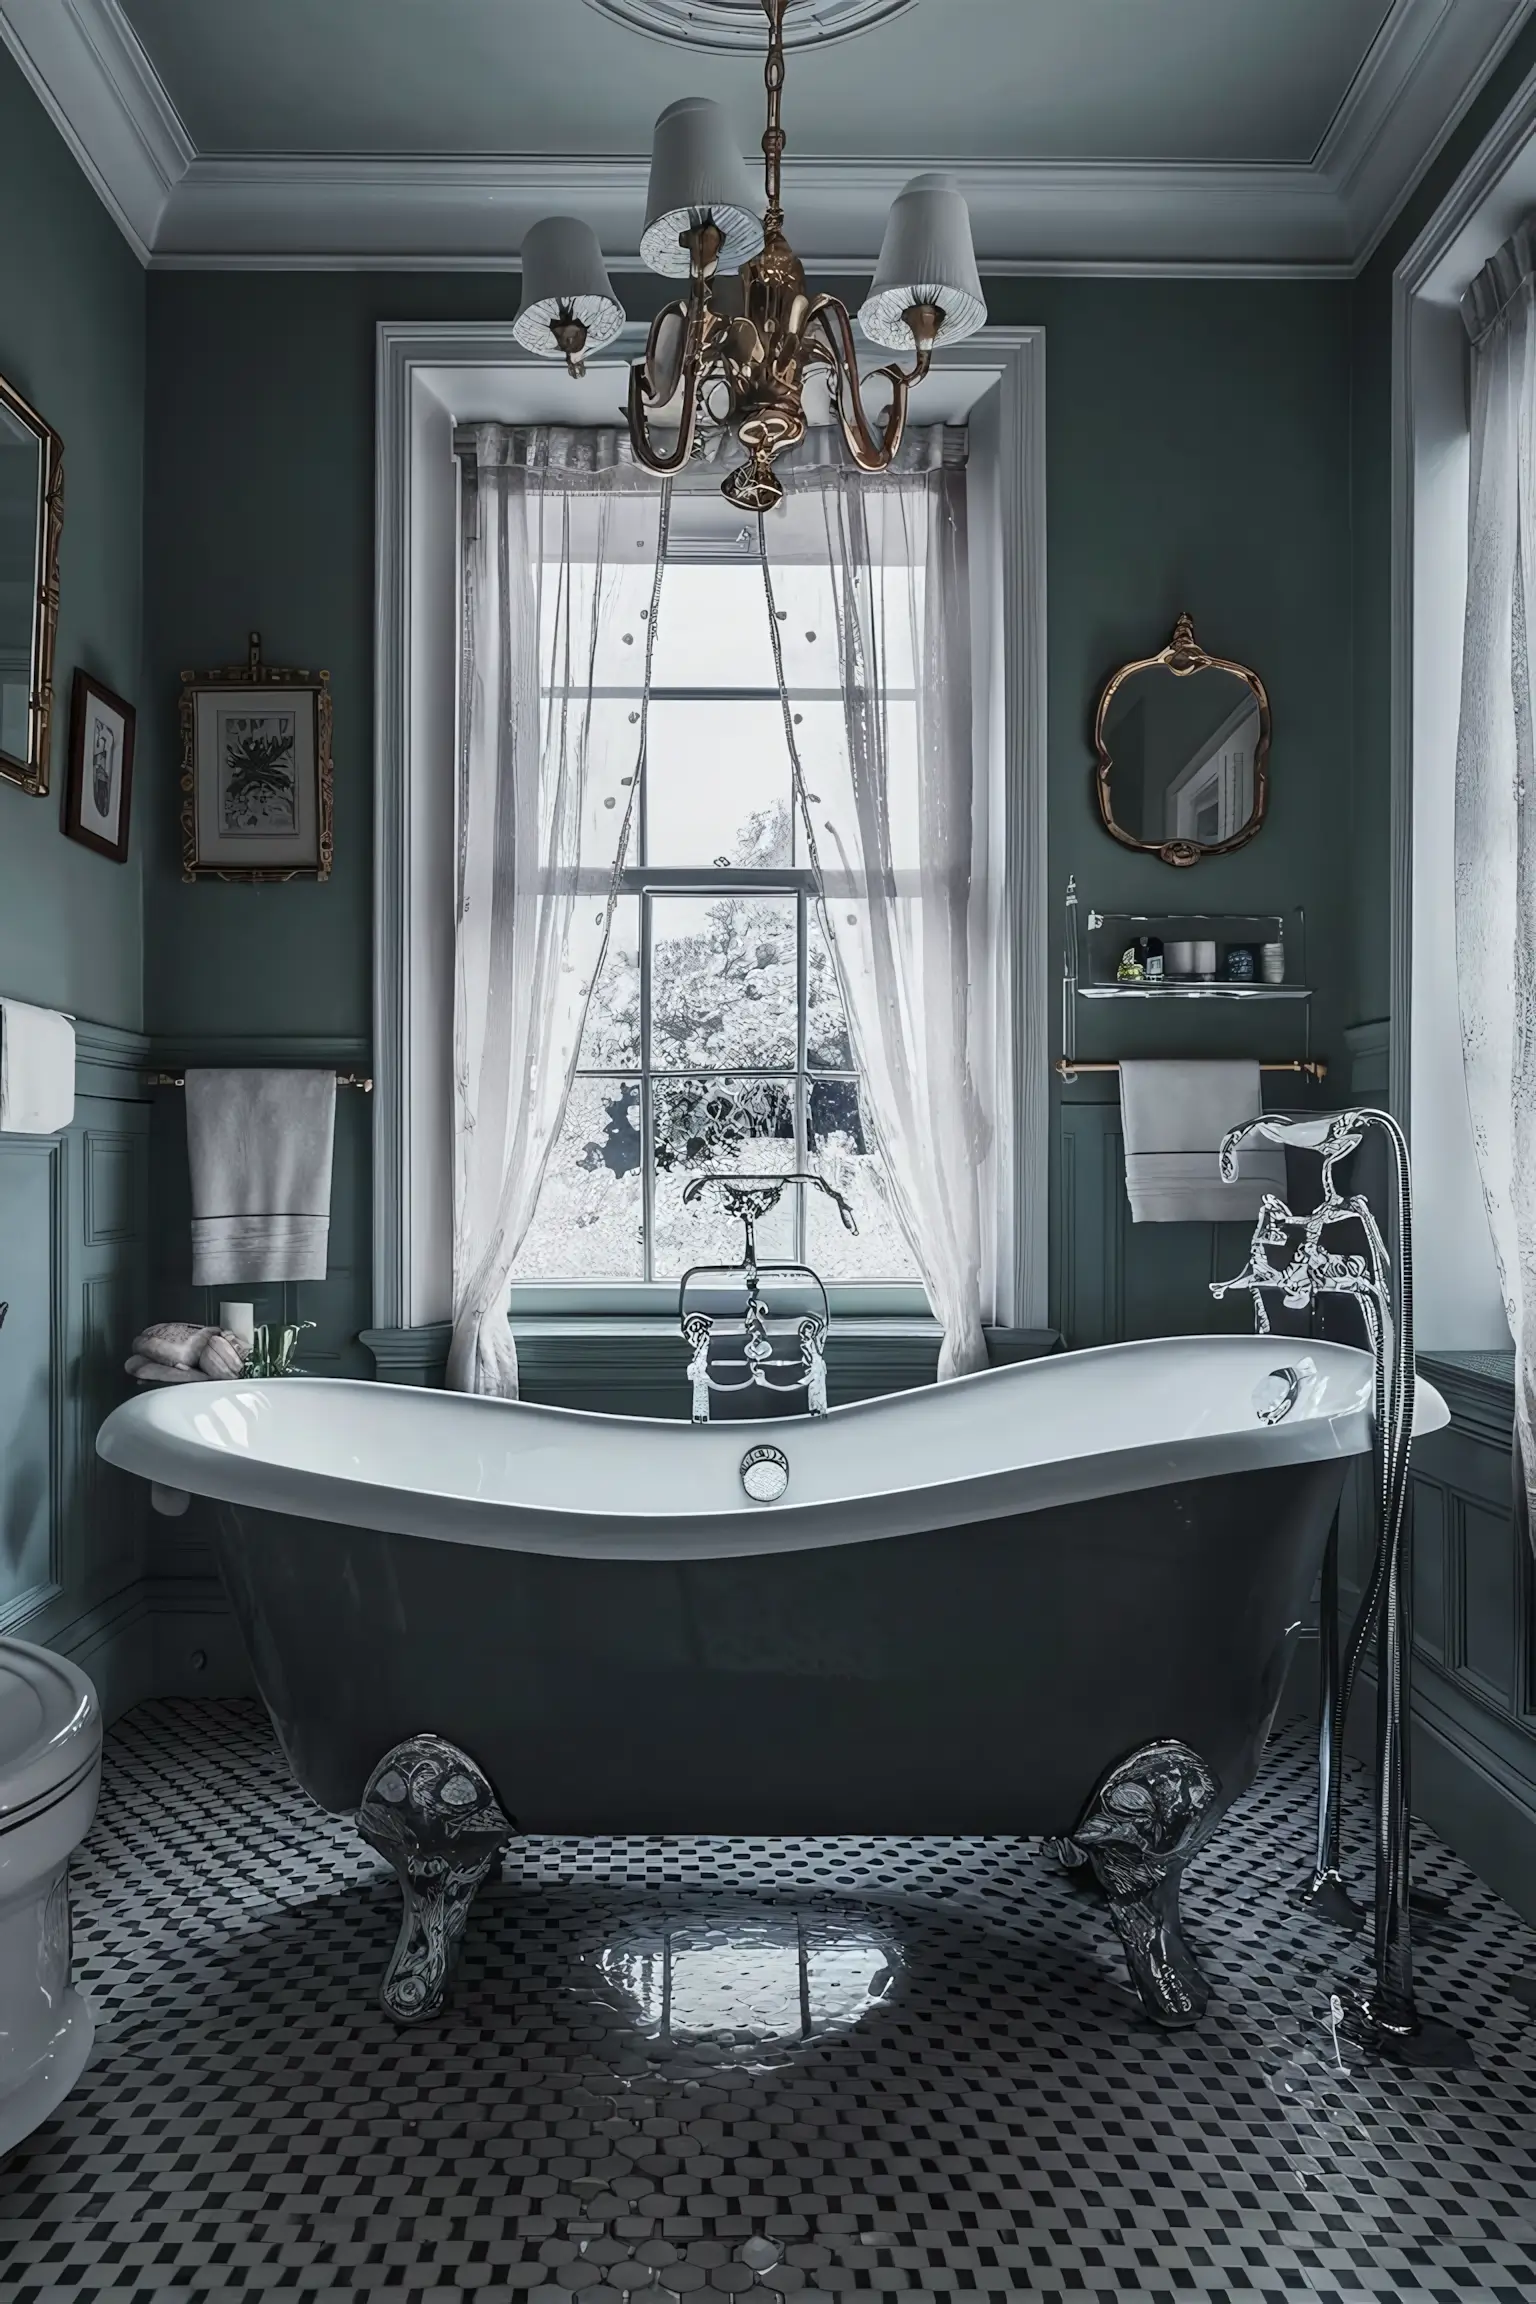 Traditional bathroom with classic design elements, including a vintage bathtub and elegant fixtures.